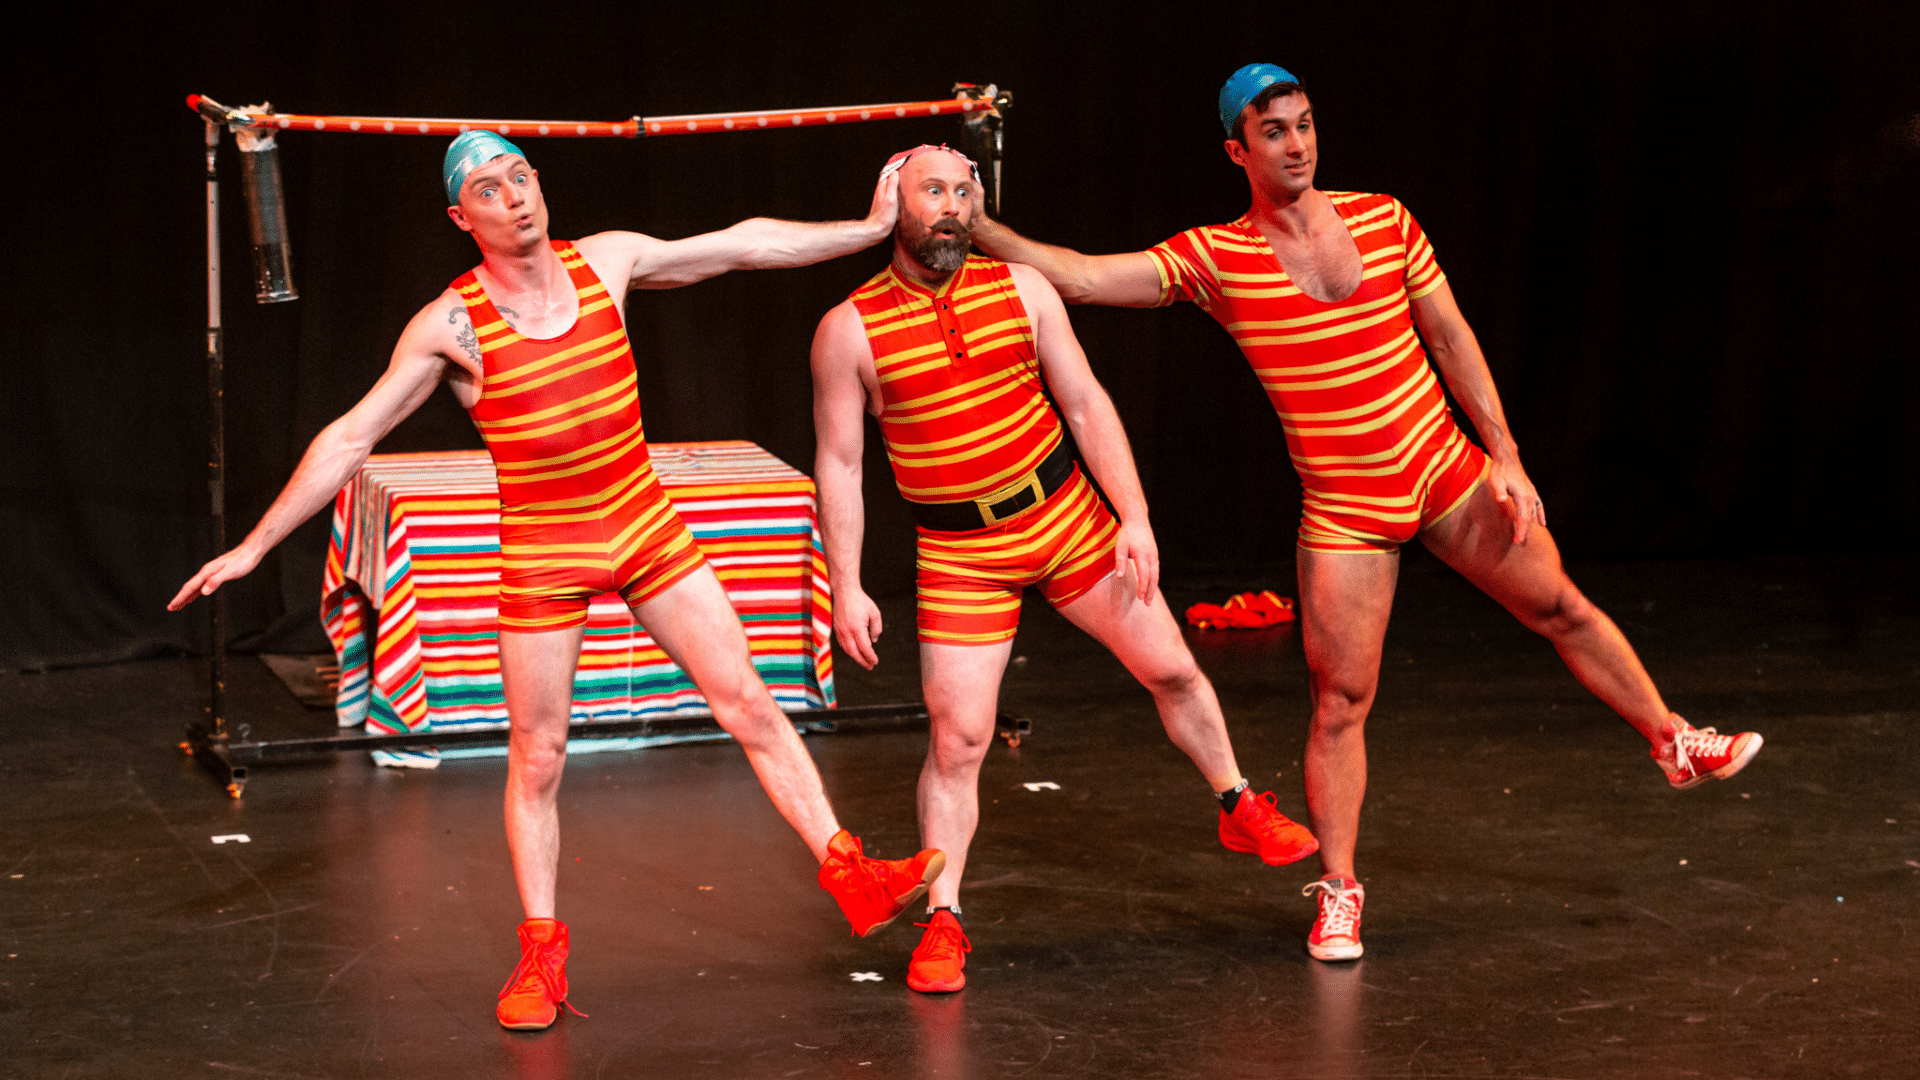 Splash Test Dummies production photo - The Dummies performing on stage, wearing old-fashioned striped bathing suits and swimming caps, stood in a line, each leaning to the side with one foot off the ground. The men on either side of the man in the middle have a hand each on the middle man's head.